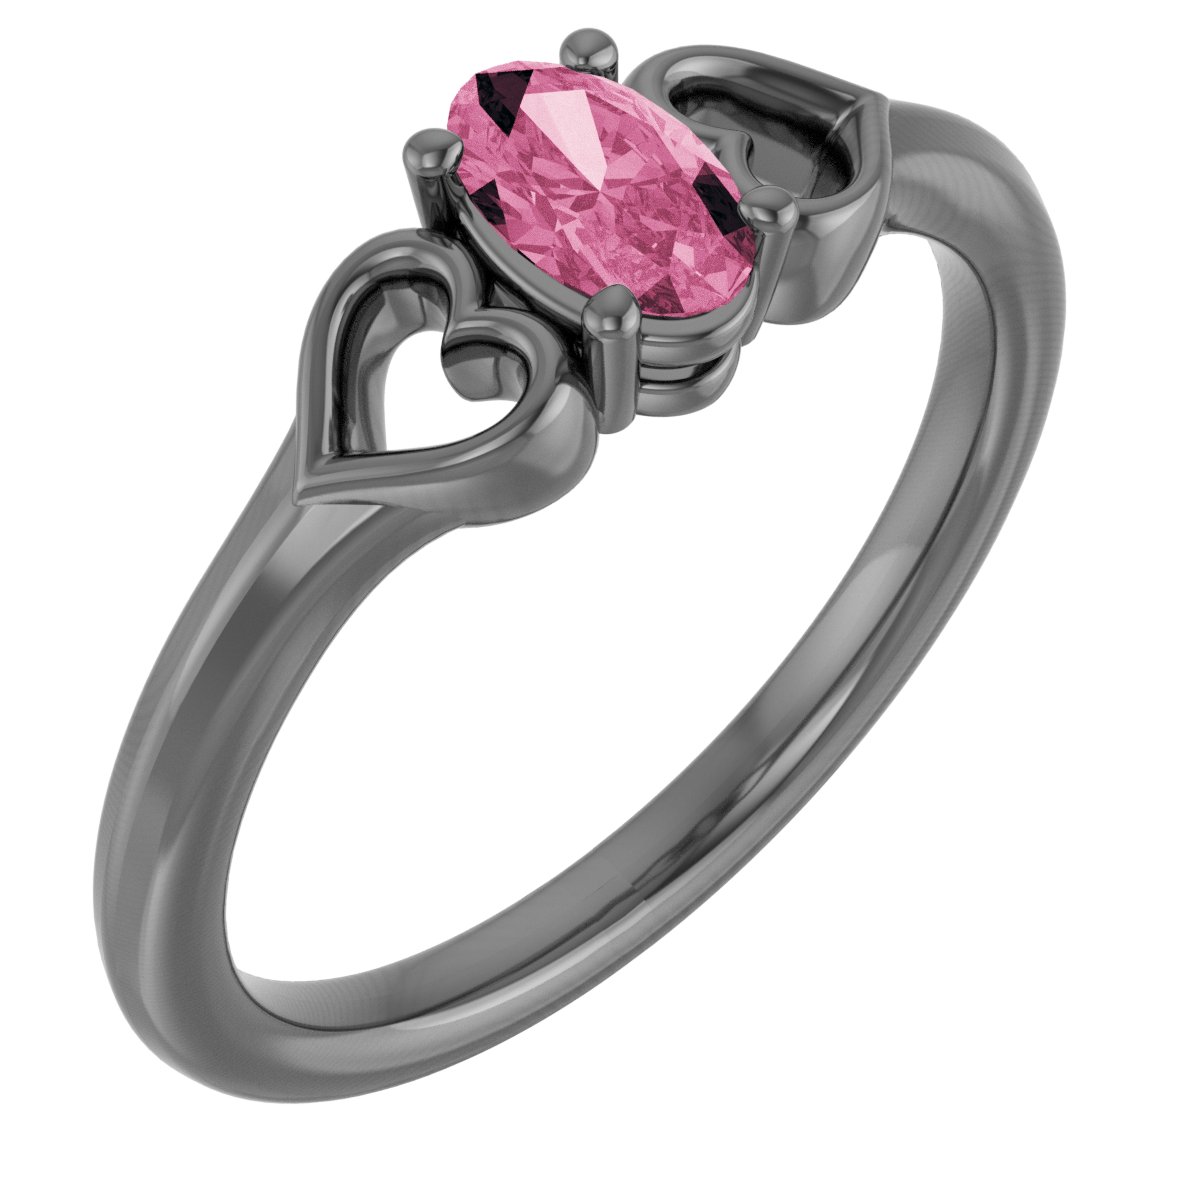 Sterling Silver Imitation Pink Tourmaline Youth Heart Ring